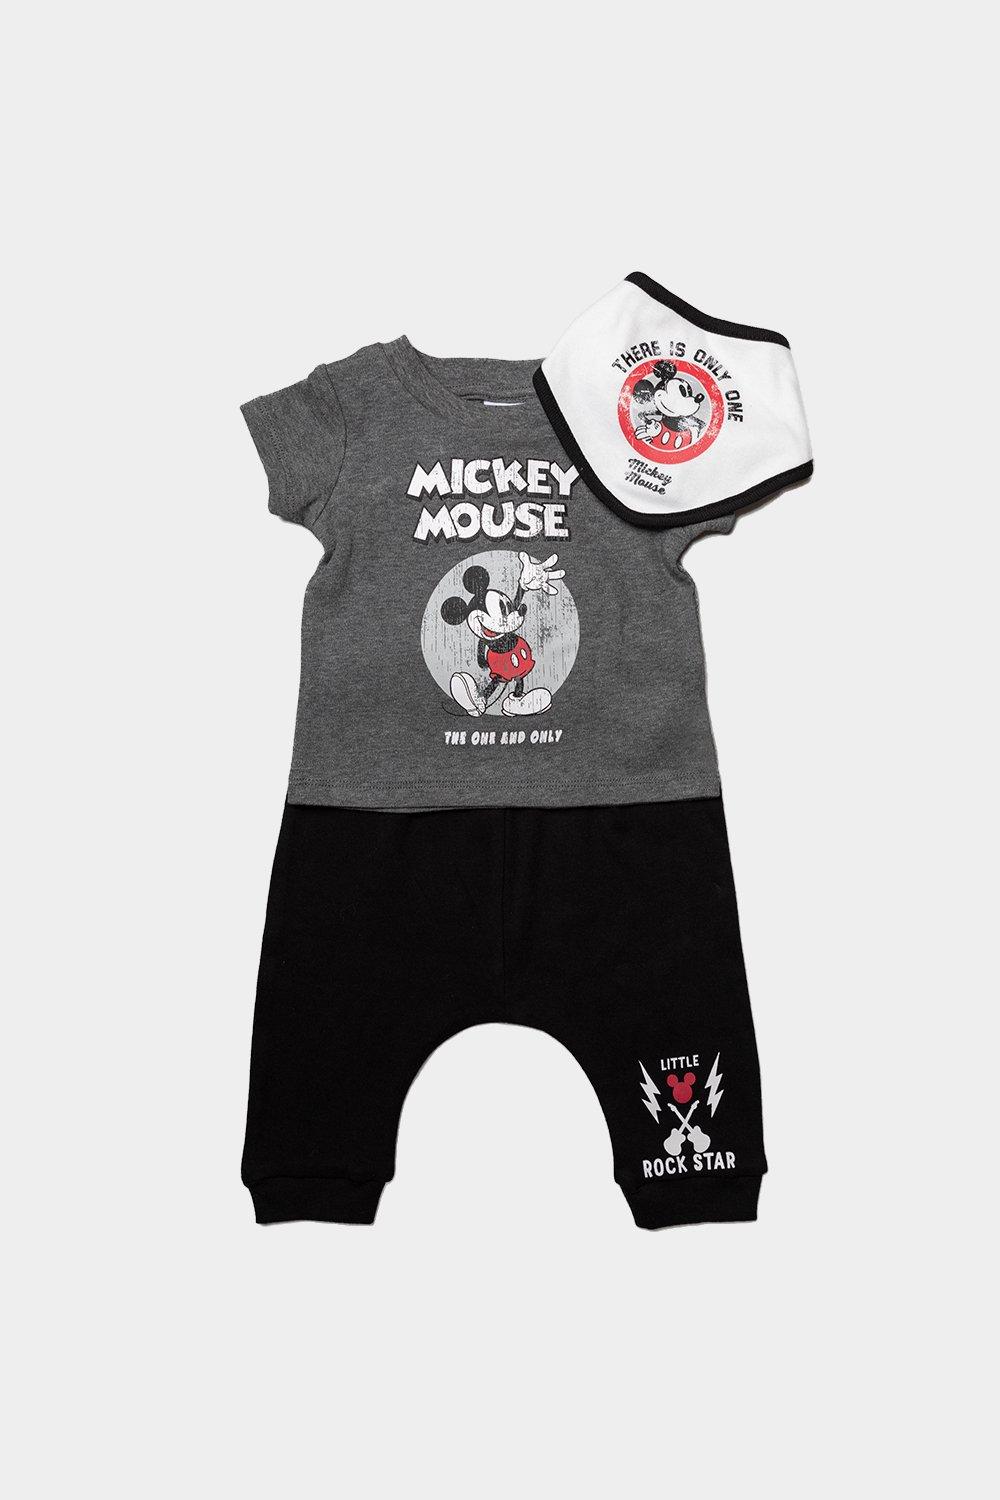 Mickey Mouse Retro 3-Piece Outfit